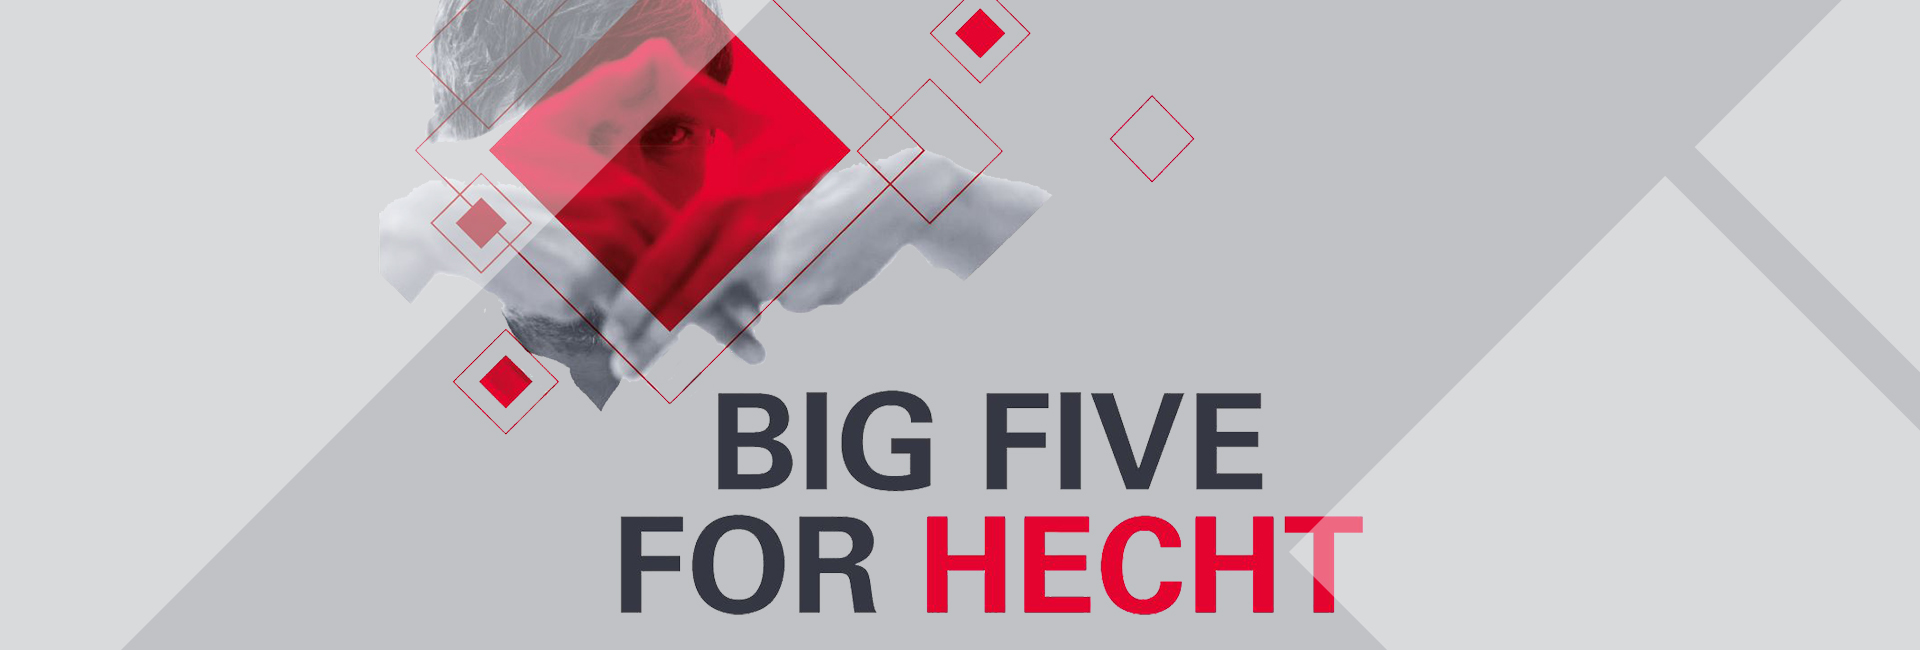 Big 5 for Hecht